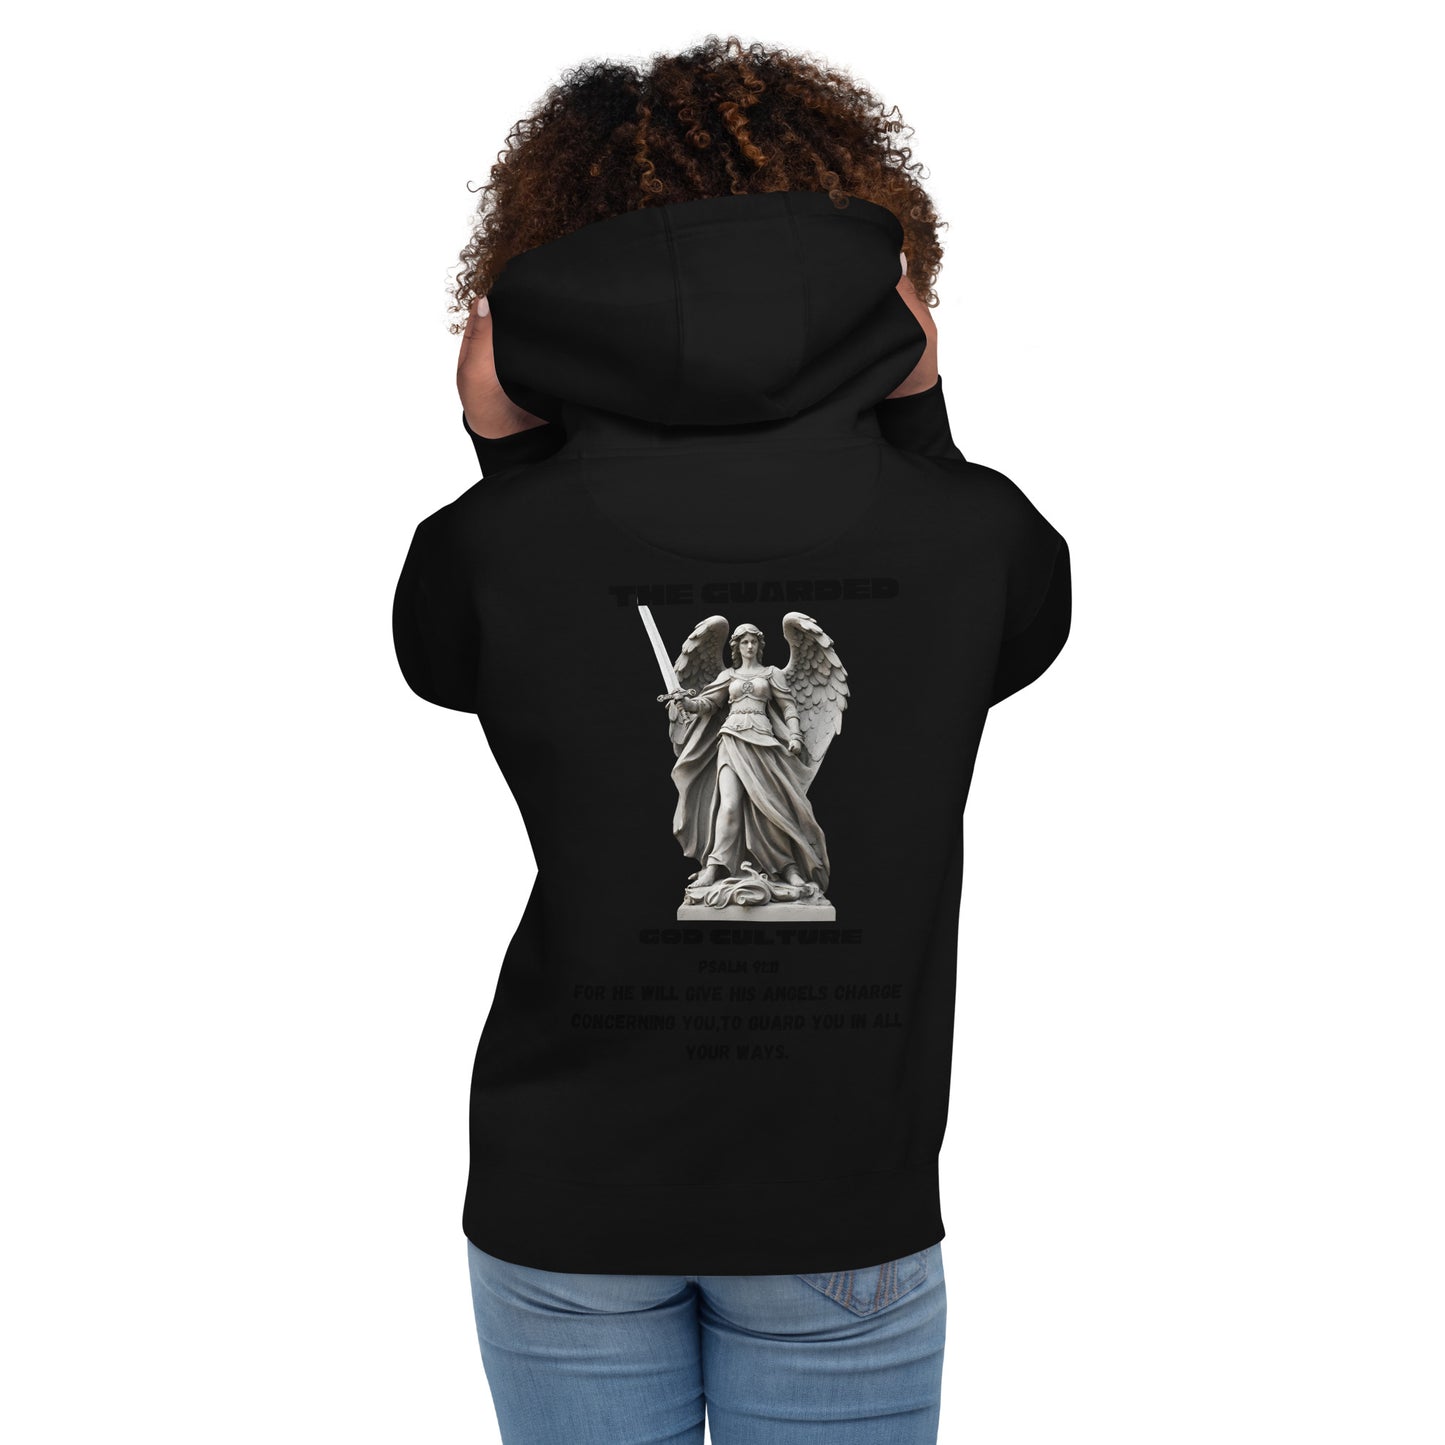 Guarded Angel hoodie psalm 91:11 black text